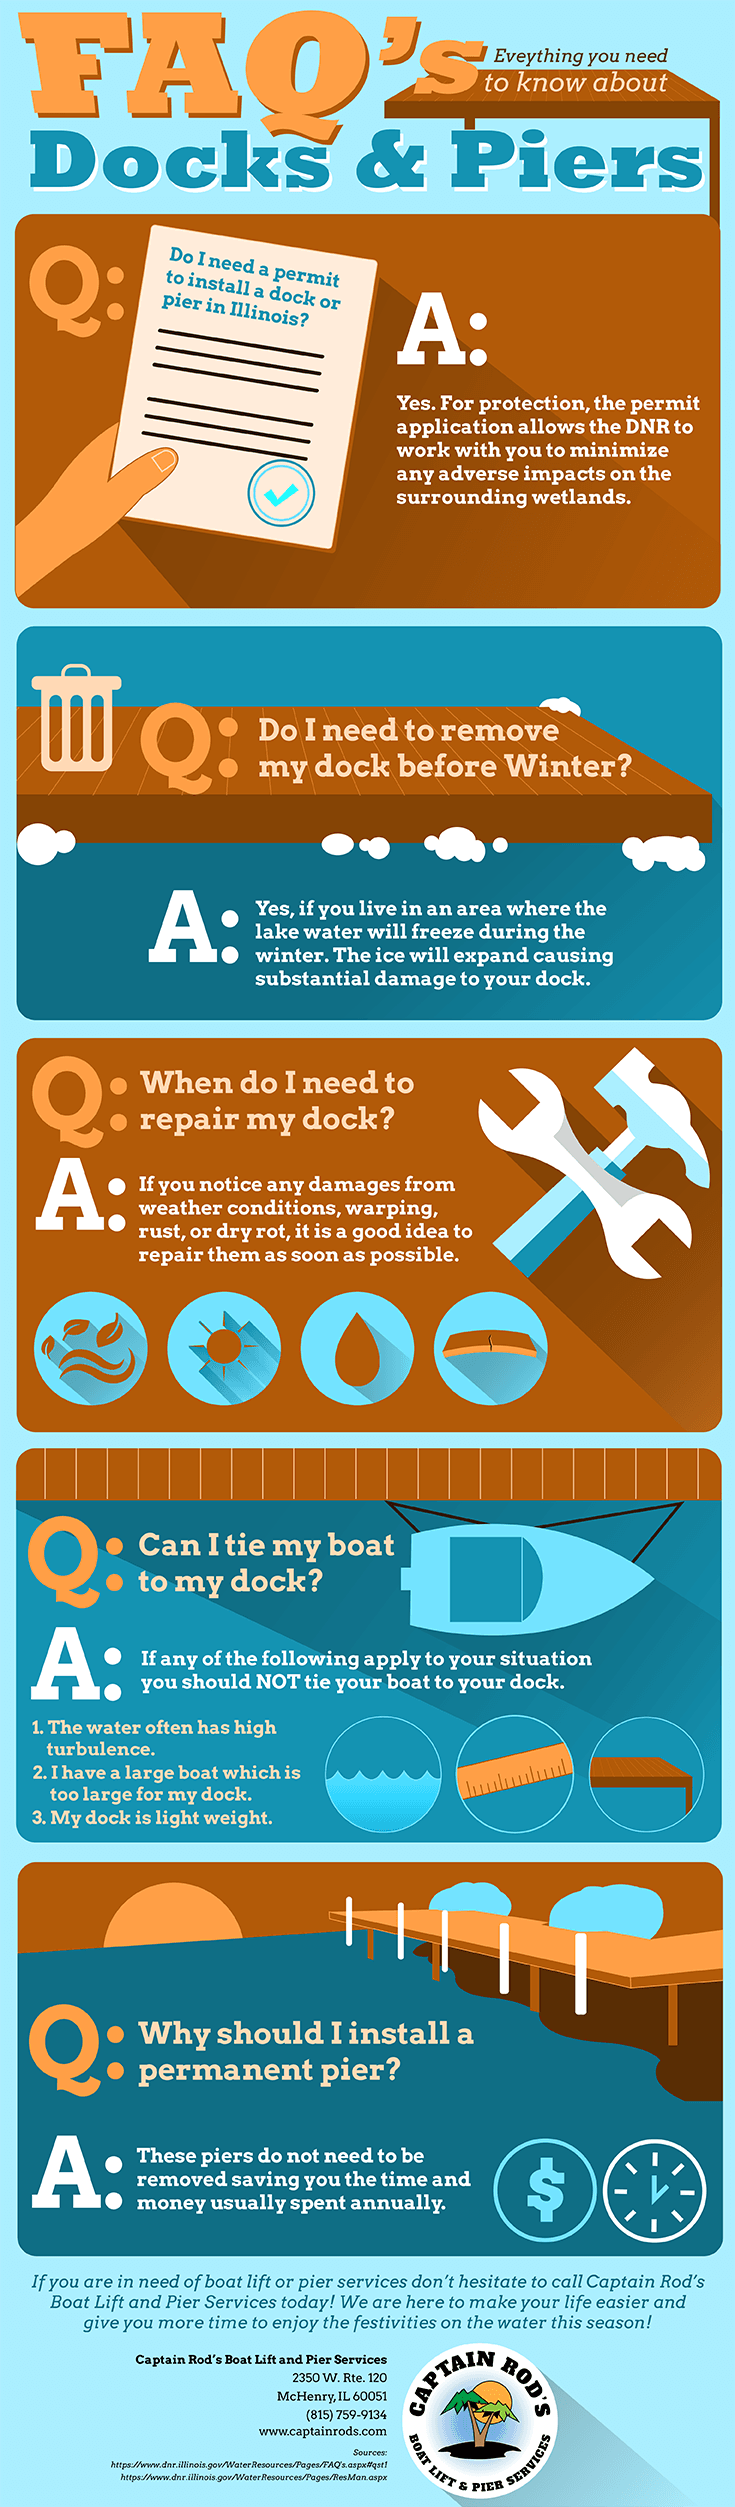 Captain Rod's Guide to Common Dock and Pier Questions [Infographic]